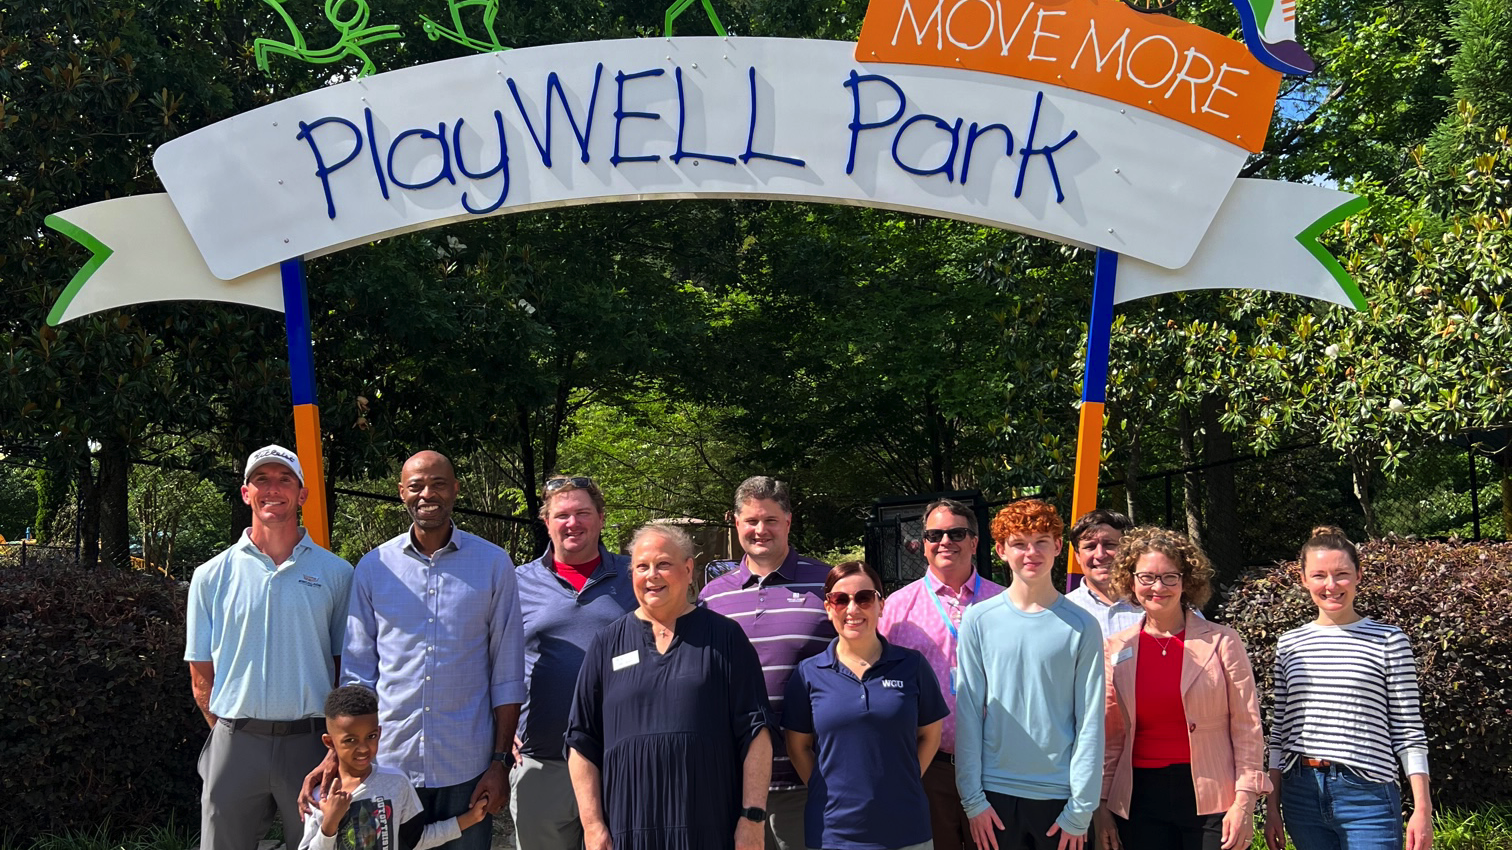 The Leadership Raleigh team standing outside the Poe Center's PlayWELL Park with the Poe Centers Executive Director Ann.